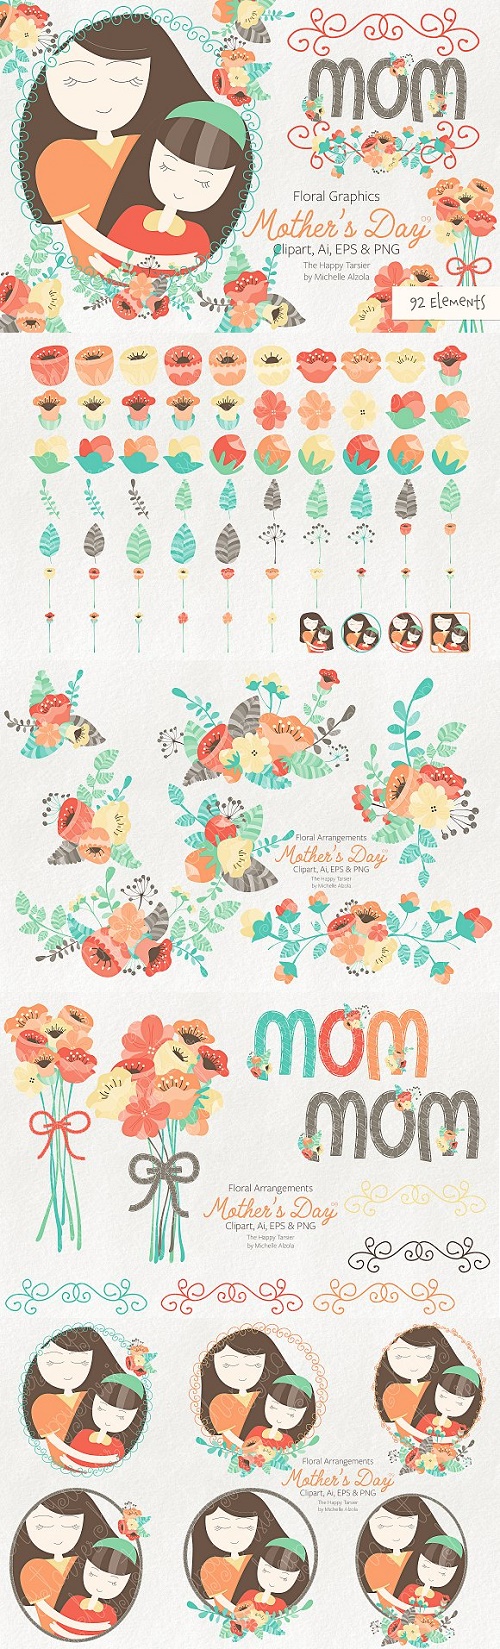 Mother's Day Clipart and Vector Grap - 2350866